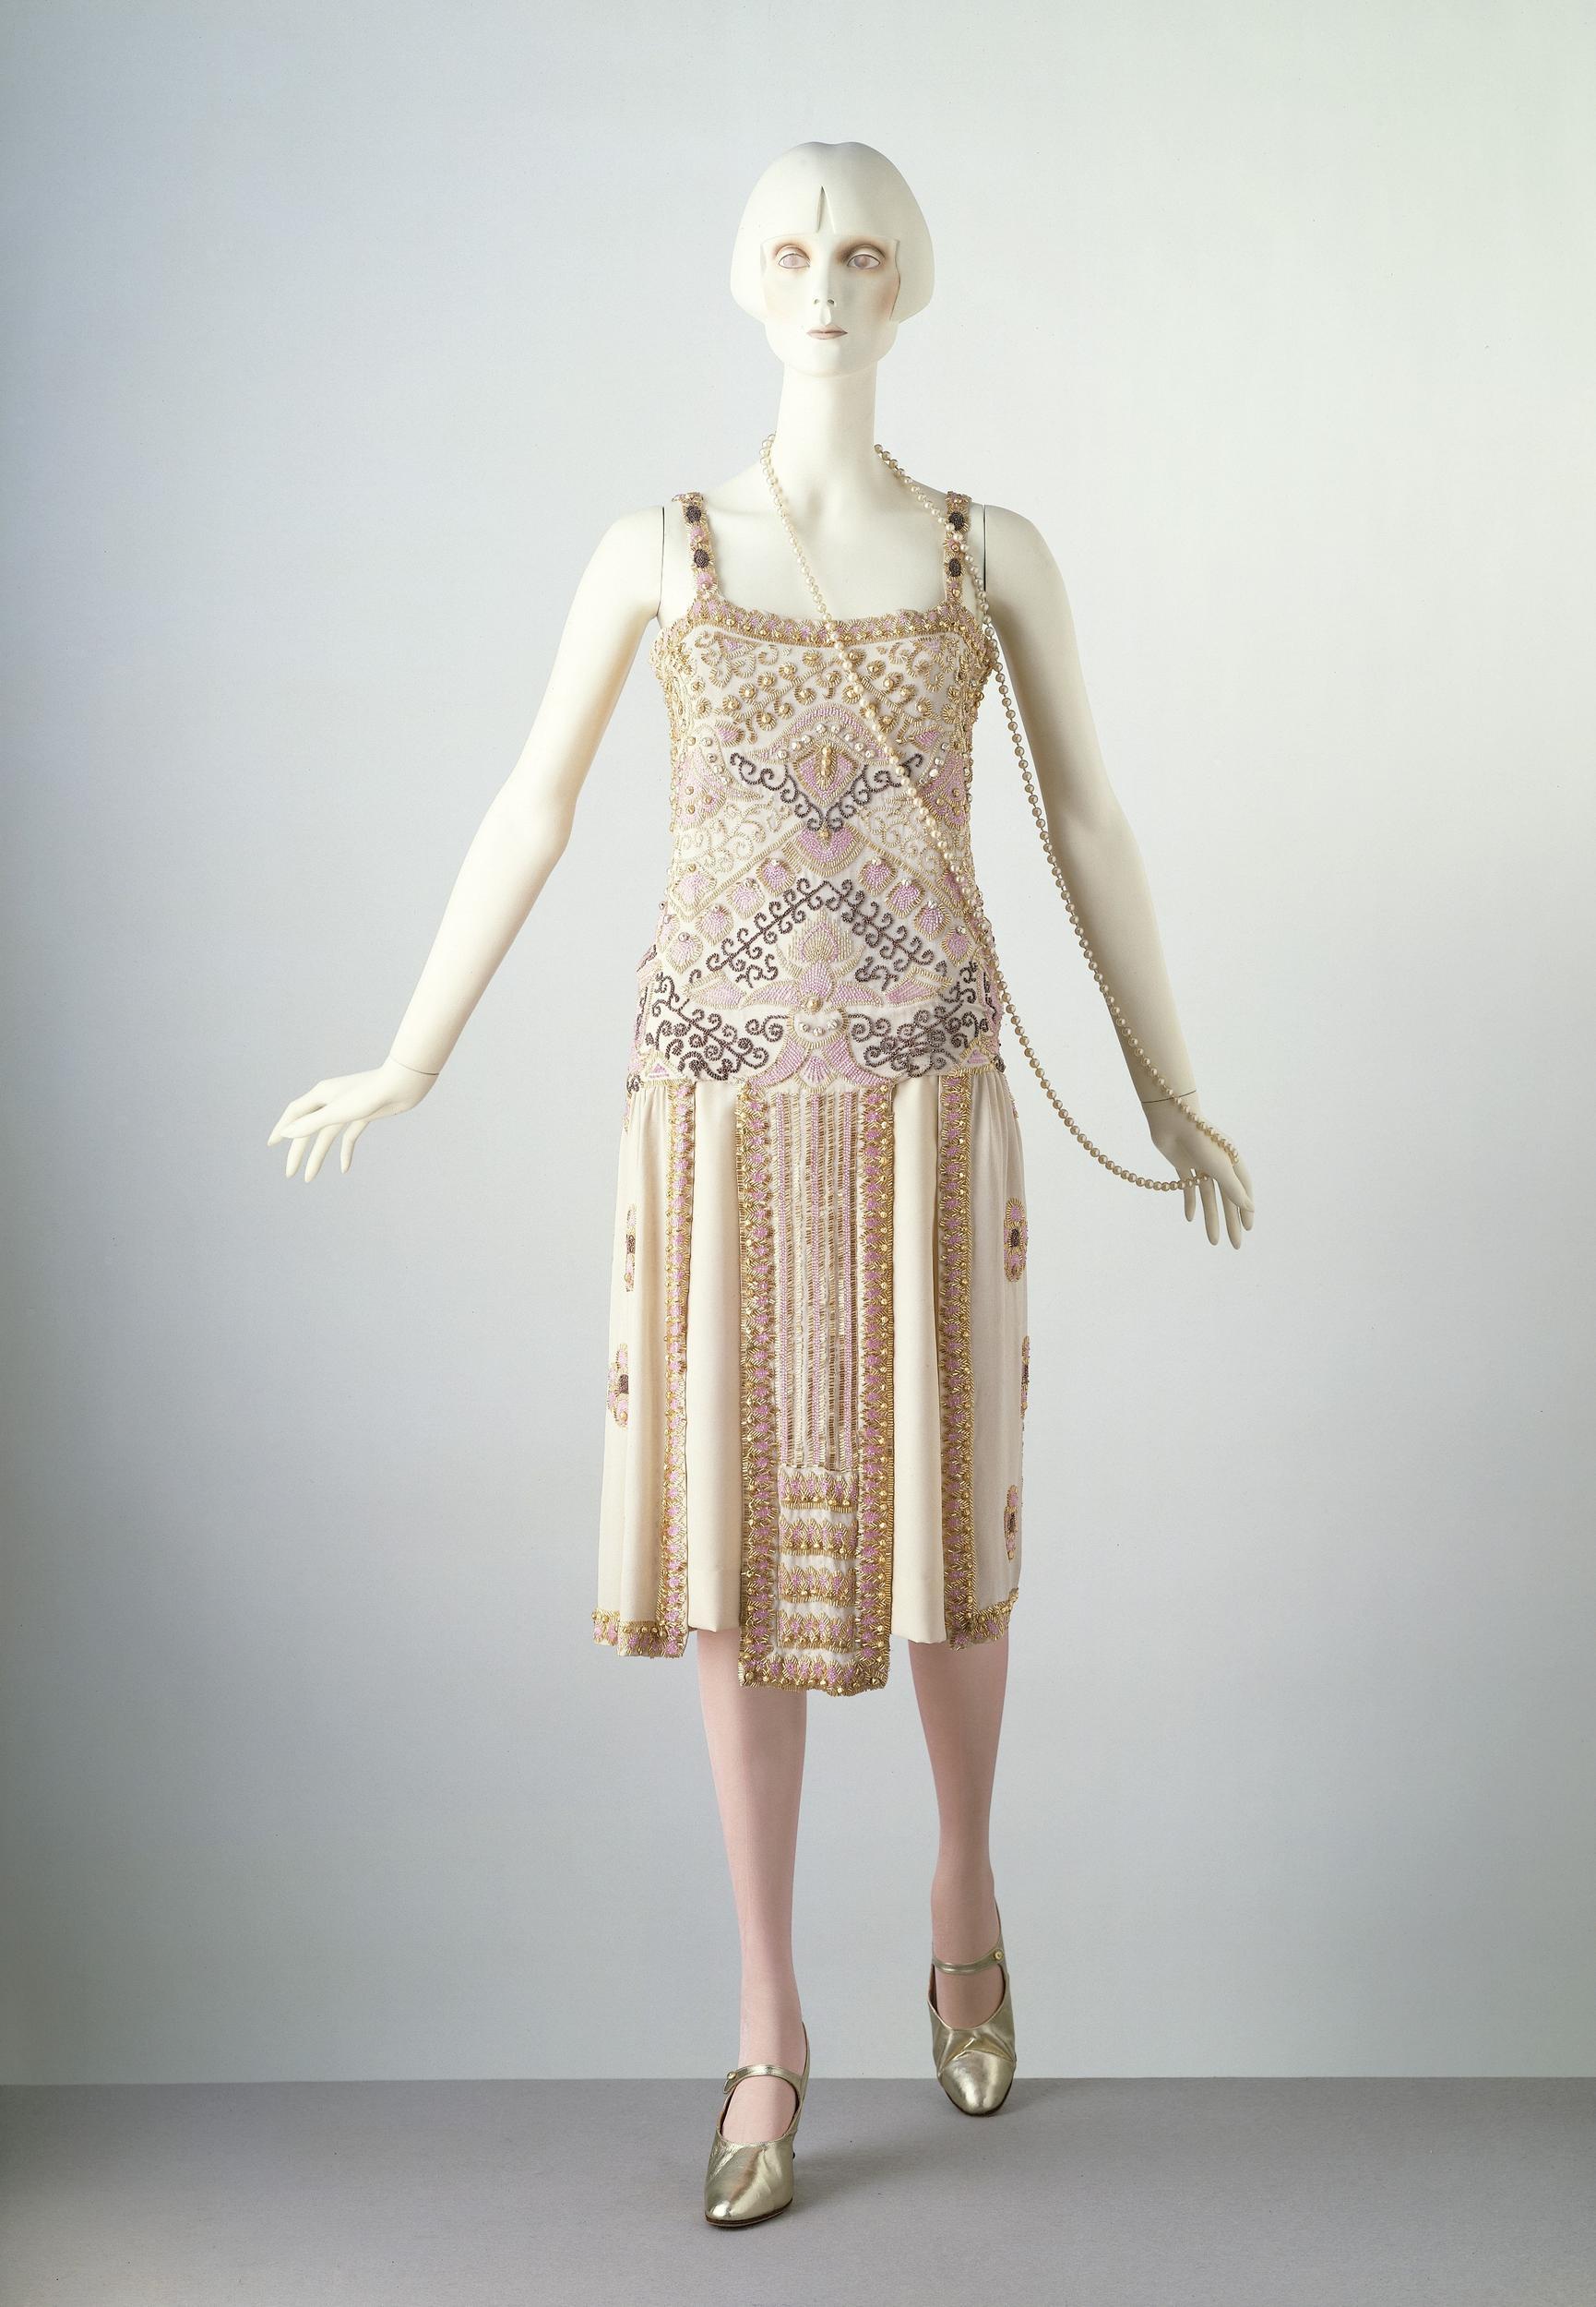 Byzance, Evening dress, Paris, France, 1924, Jean Patou, Silk, embroidered with glass bugle beads and imitation baroque pearls, lined with georgette and fastened with metal hooks and eyes, T.198-1970